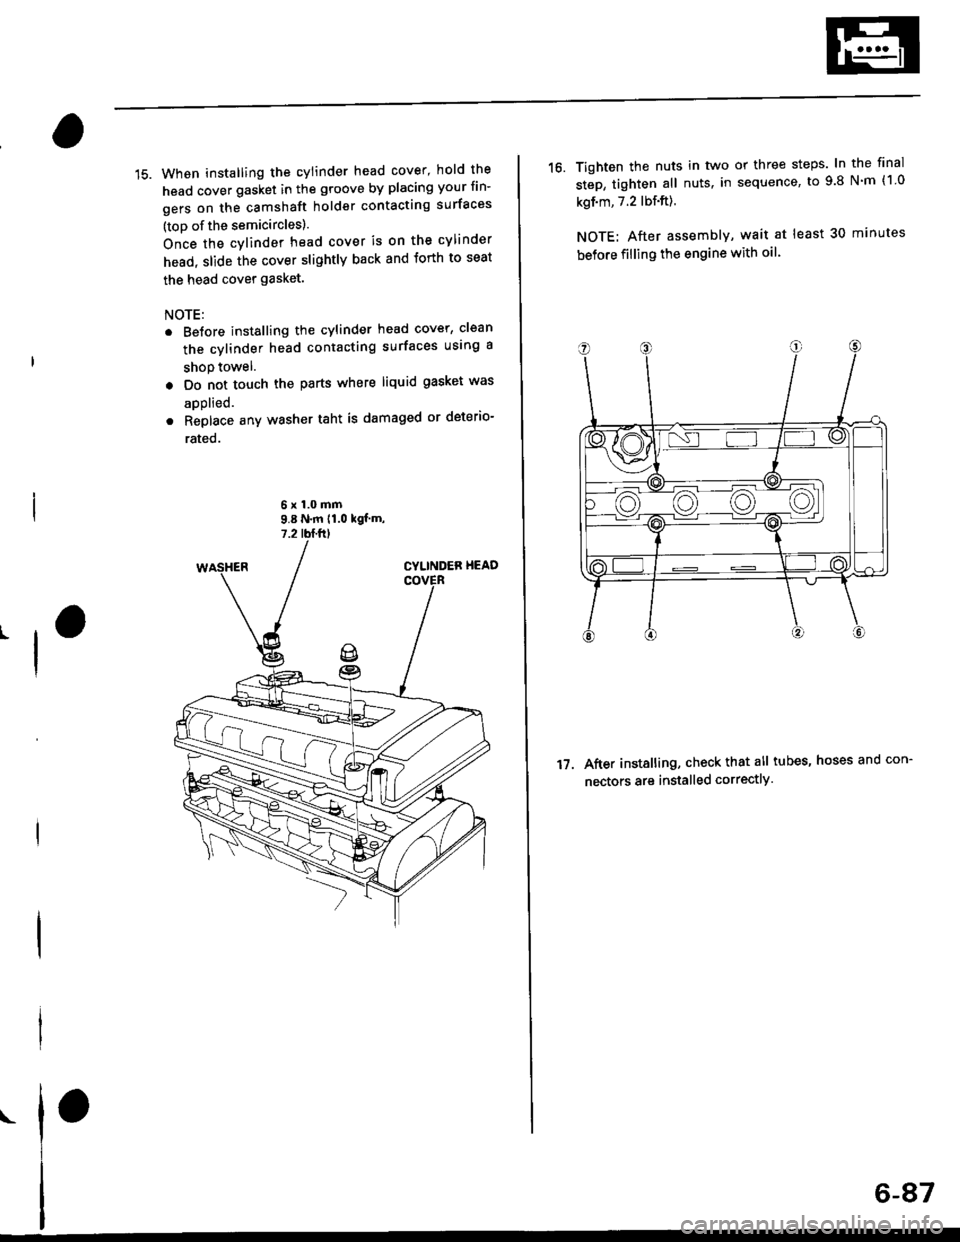 HONDA CIVIC 1997 6.G Workshop Manual 15. When installing the cylinder head cover, hold the
head cover gasket in the groove by placing your fin-
gers on the camshaft holder contacting surfaces
(toD of the semicircles).
Once the cylinder h